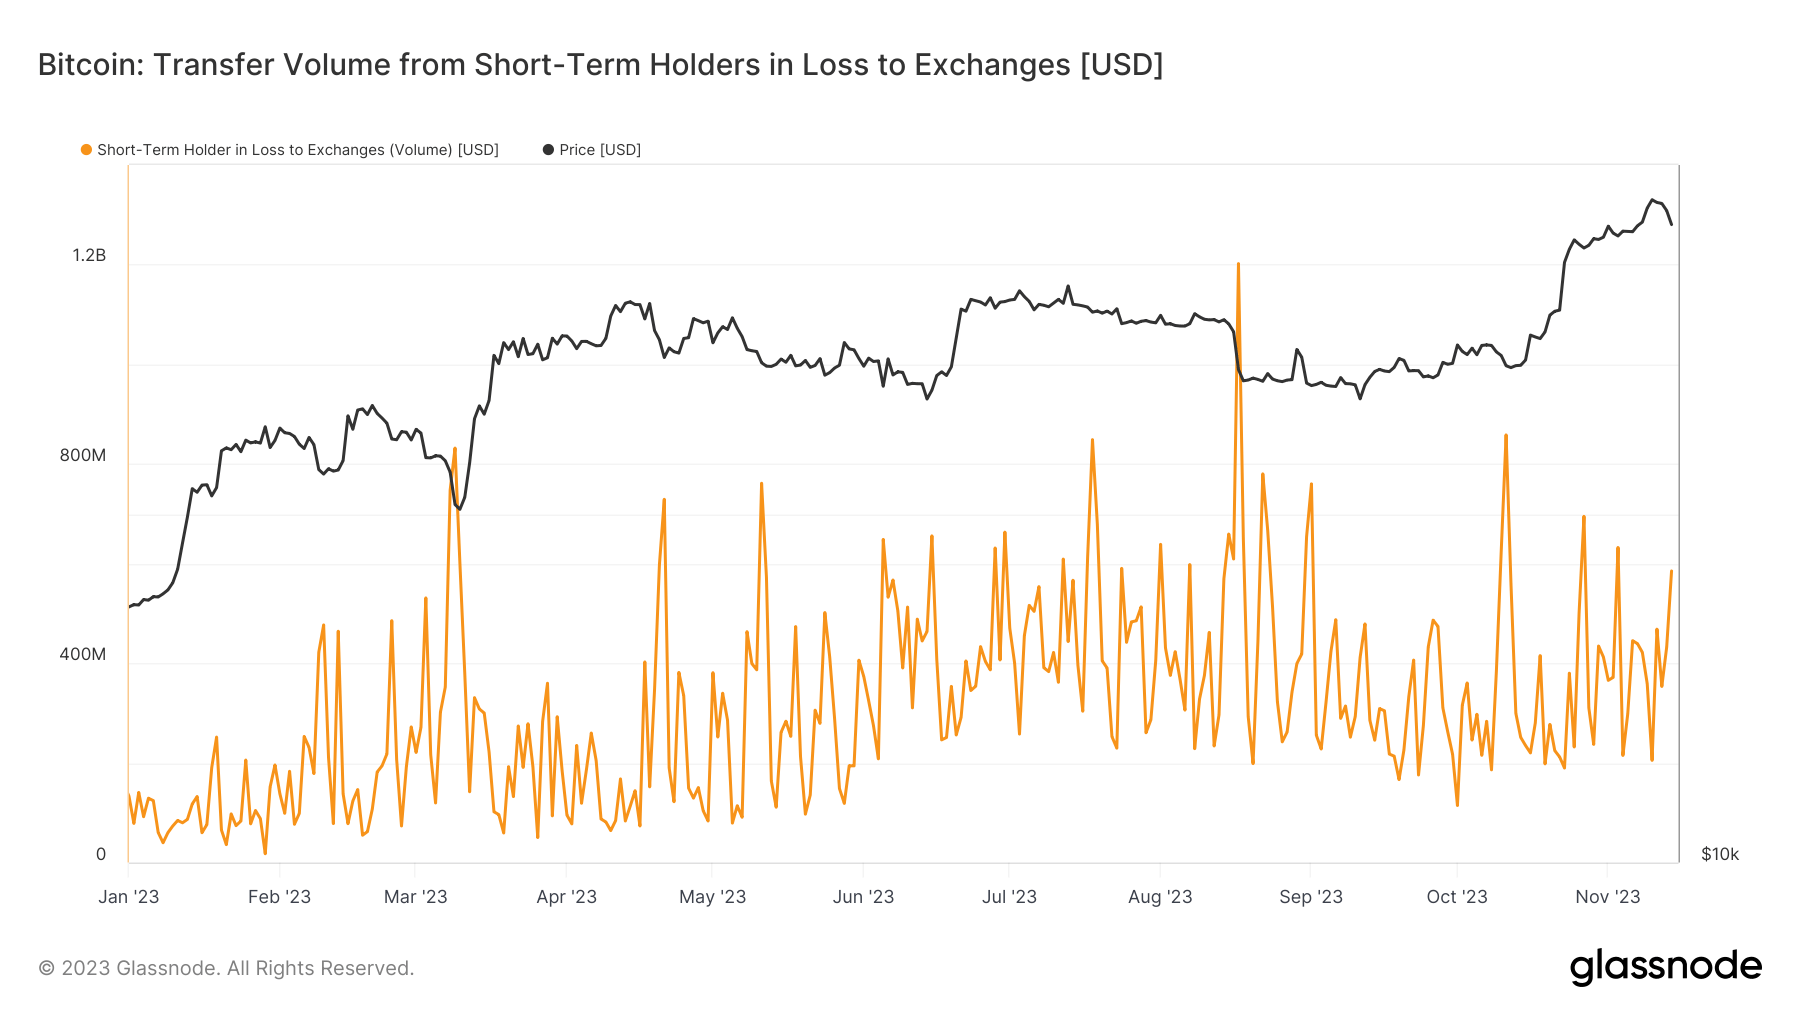 Short-term holders in loss to exchanges: (Source: Glassnode)